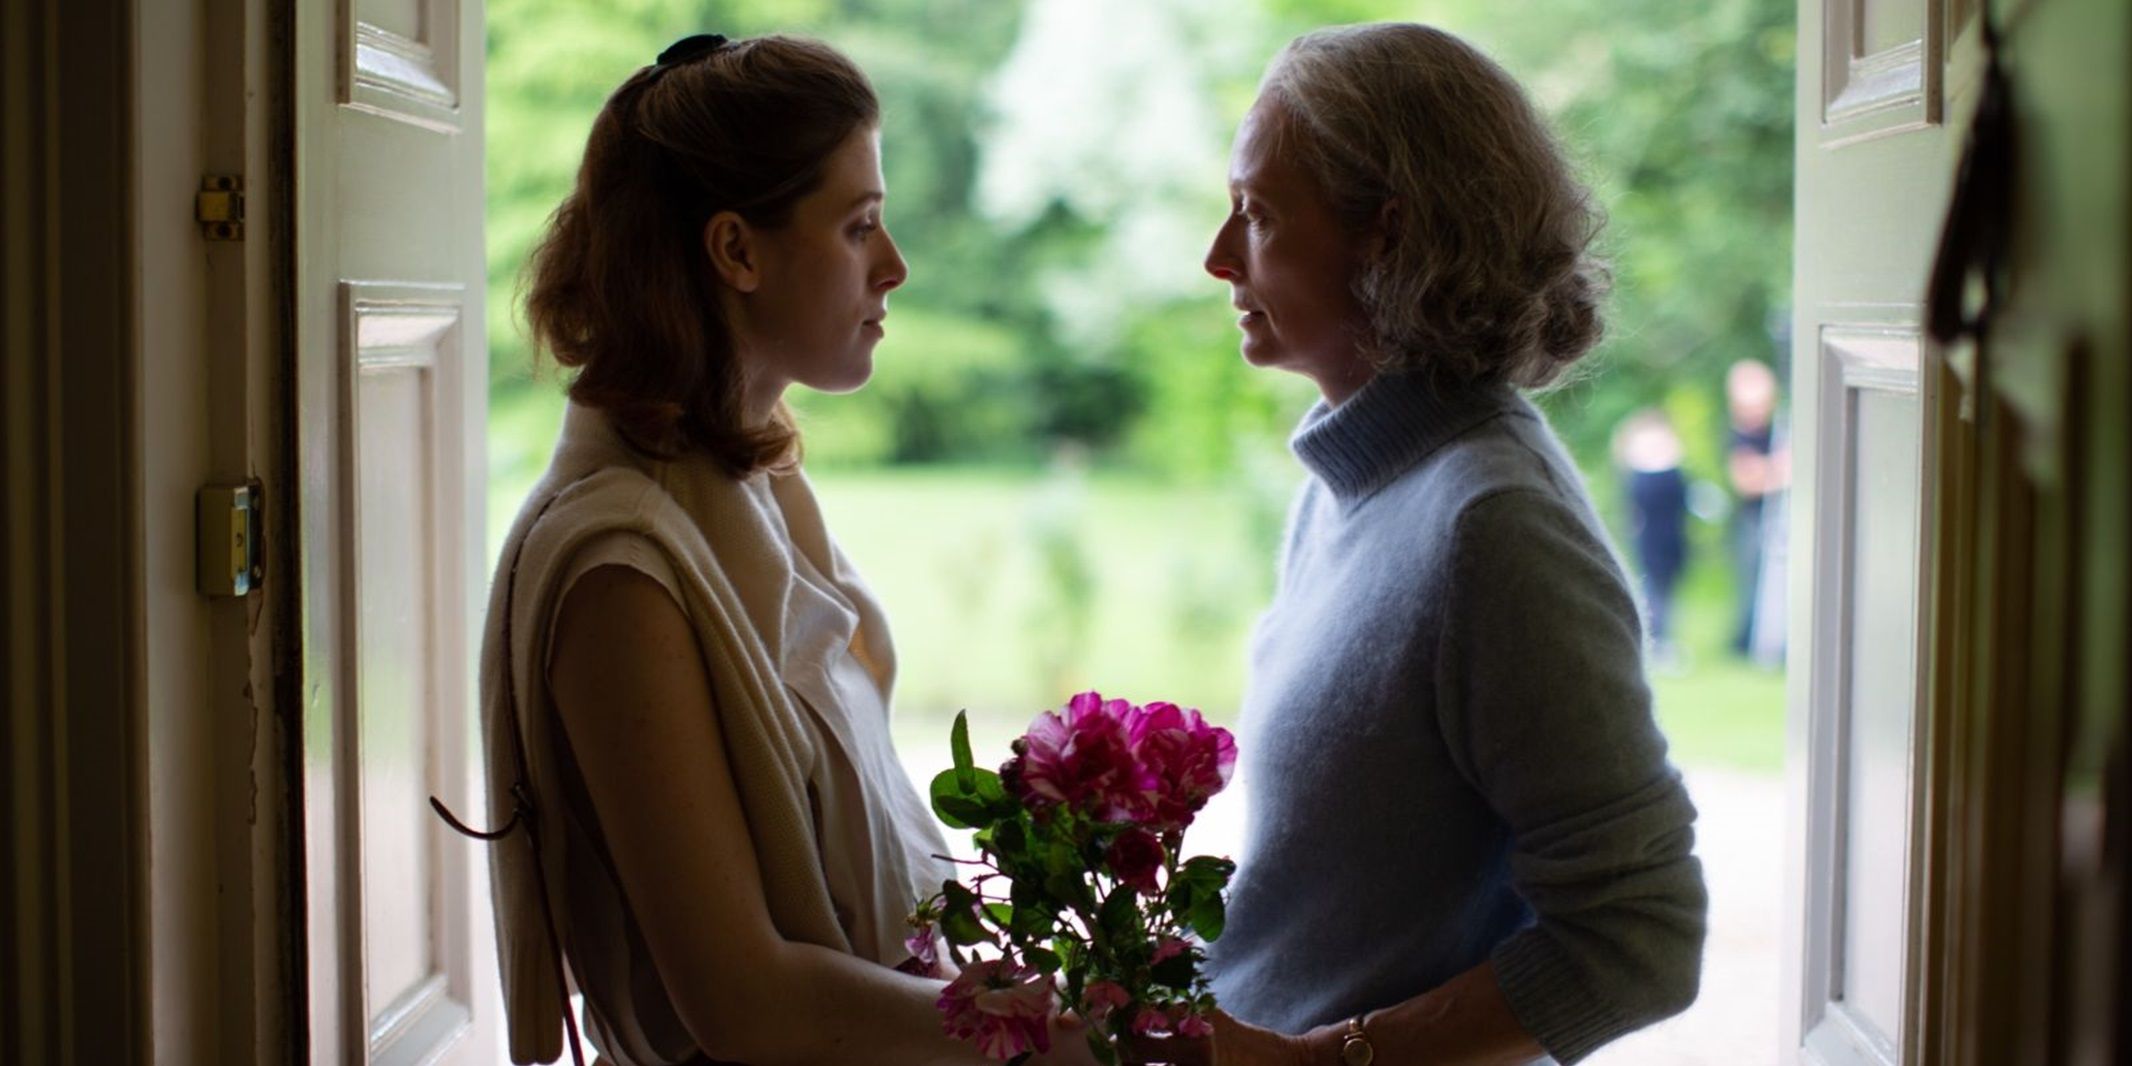 Julie talks to her mom in The Souvenir Part II